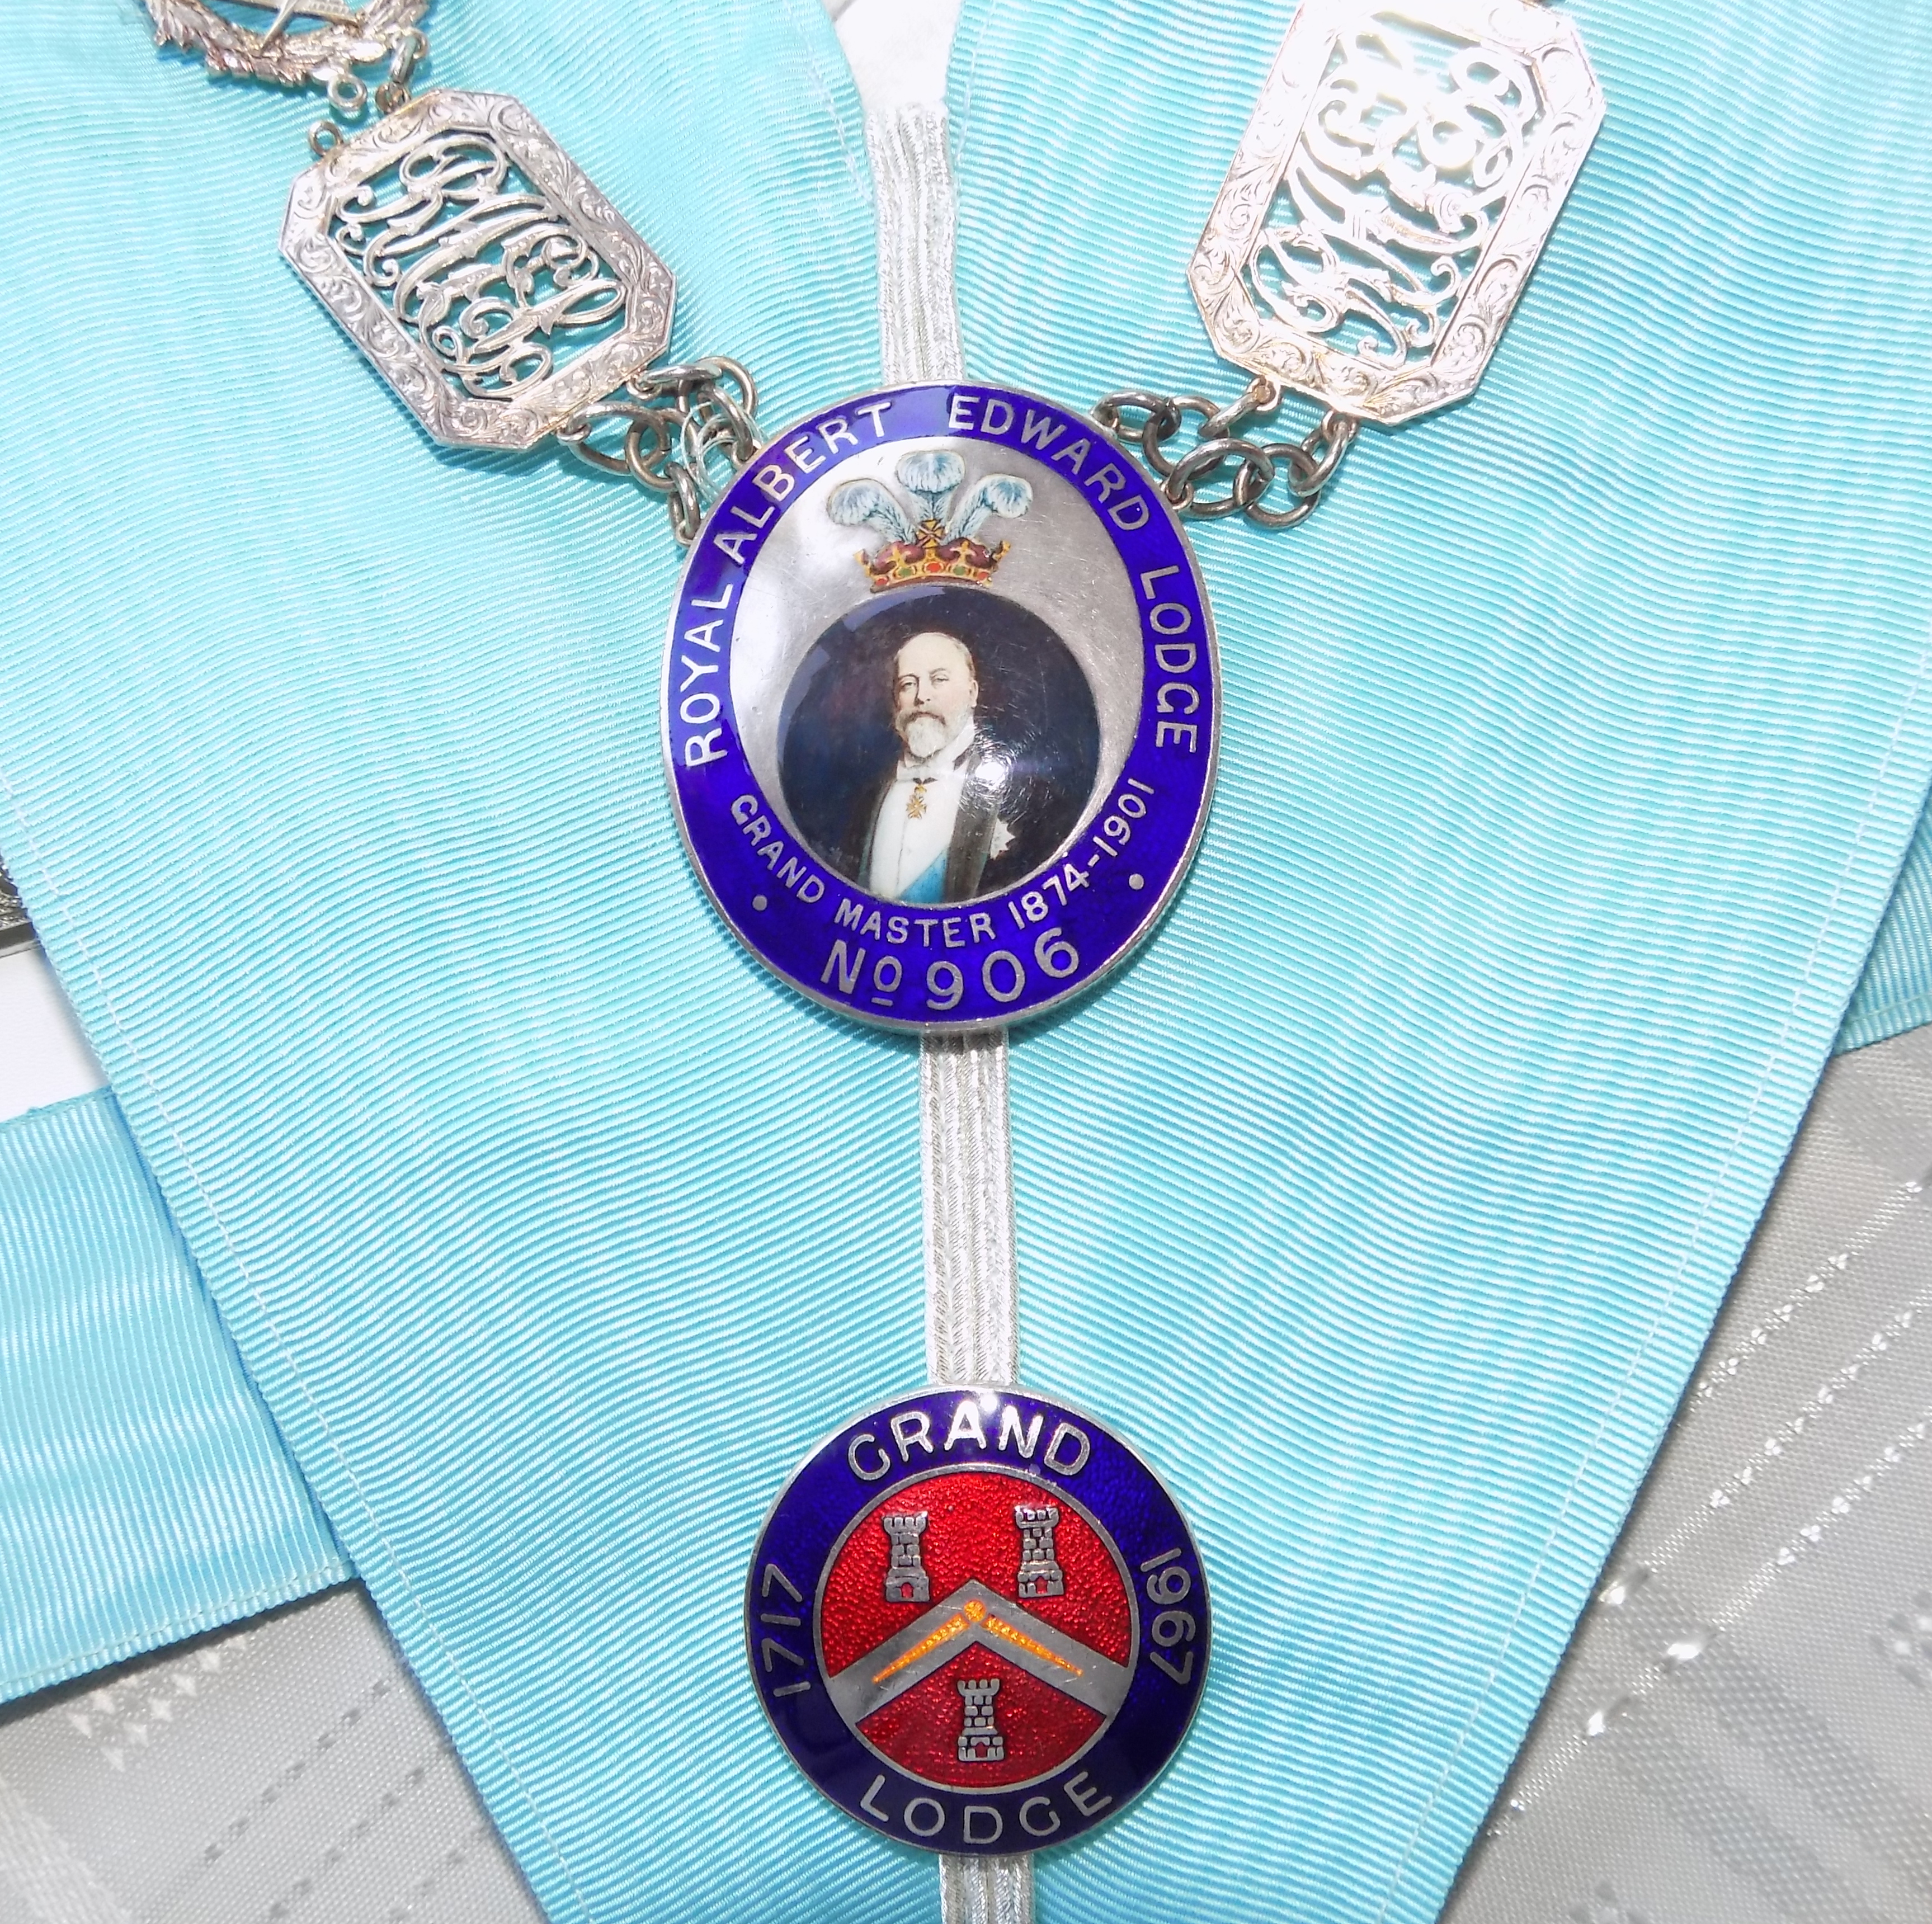 The medallions on the Royal Albert Edward Lodge's Worshipful Master's collar. A large one shows King Edward VII surrounded by the words 